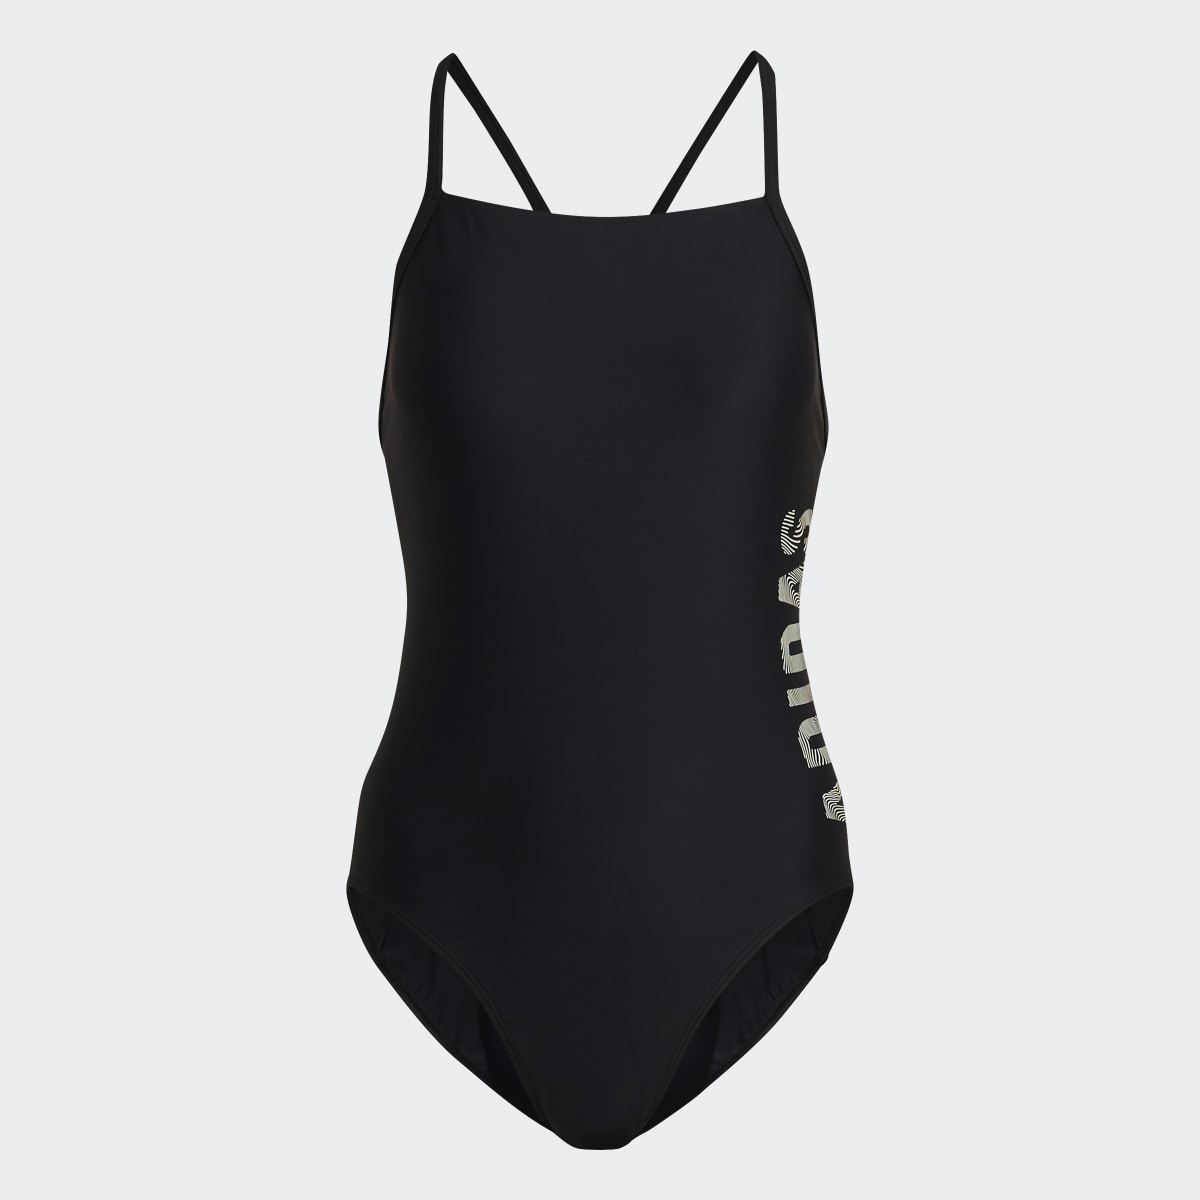 Adidas Thin Straps Branded Swimsuit. 5